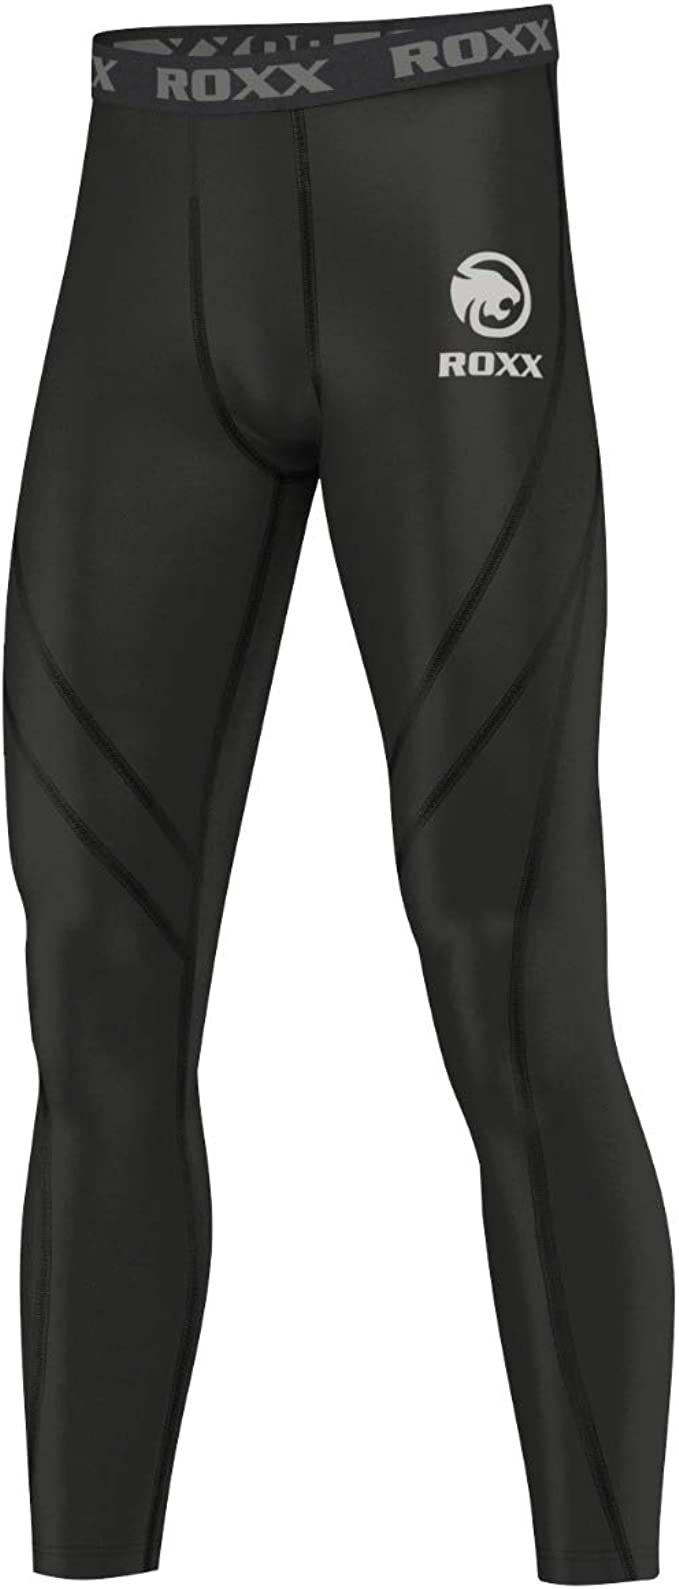 Mens Full Body Compression Suit Thermal Skins Base Layer Tights Set –  DBXGEAR